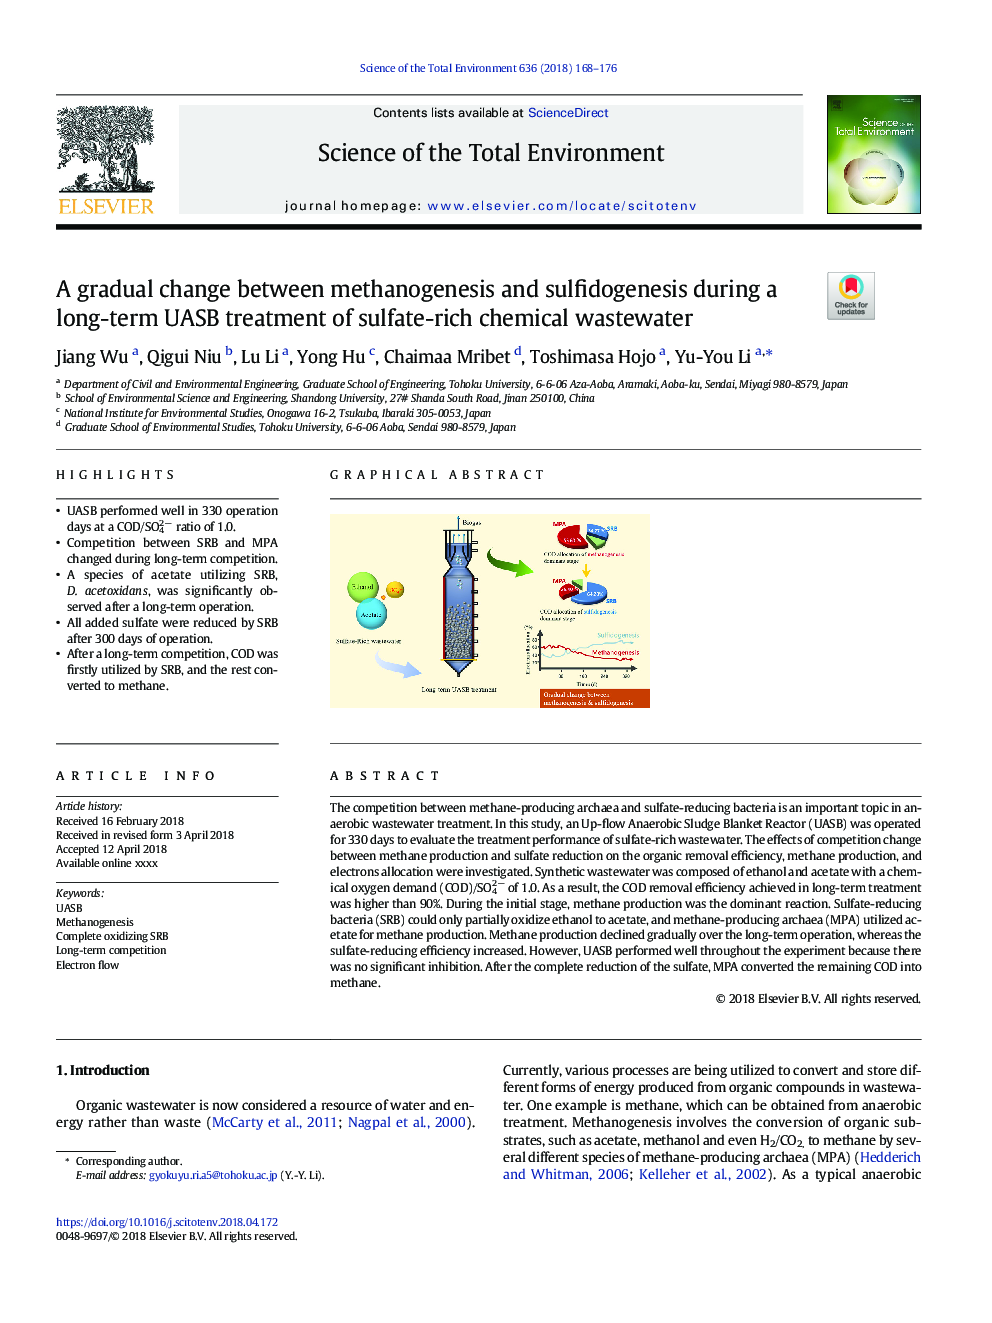 A gradual change between methanogenesis and sulfidogenesis during a long-term UASB treatment of sulfate-rich chemical wastewater